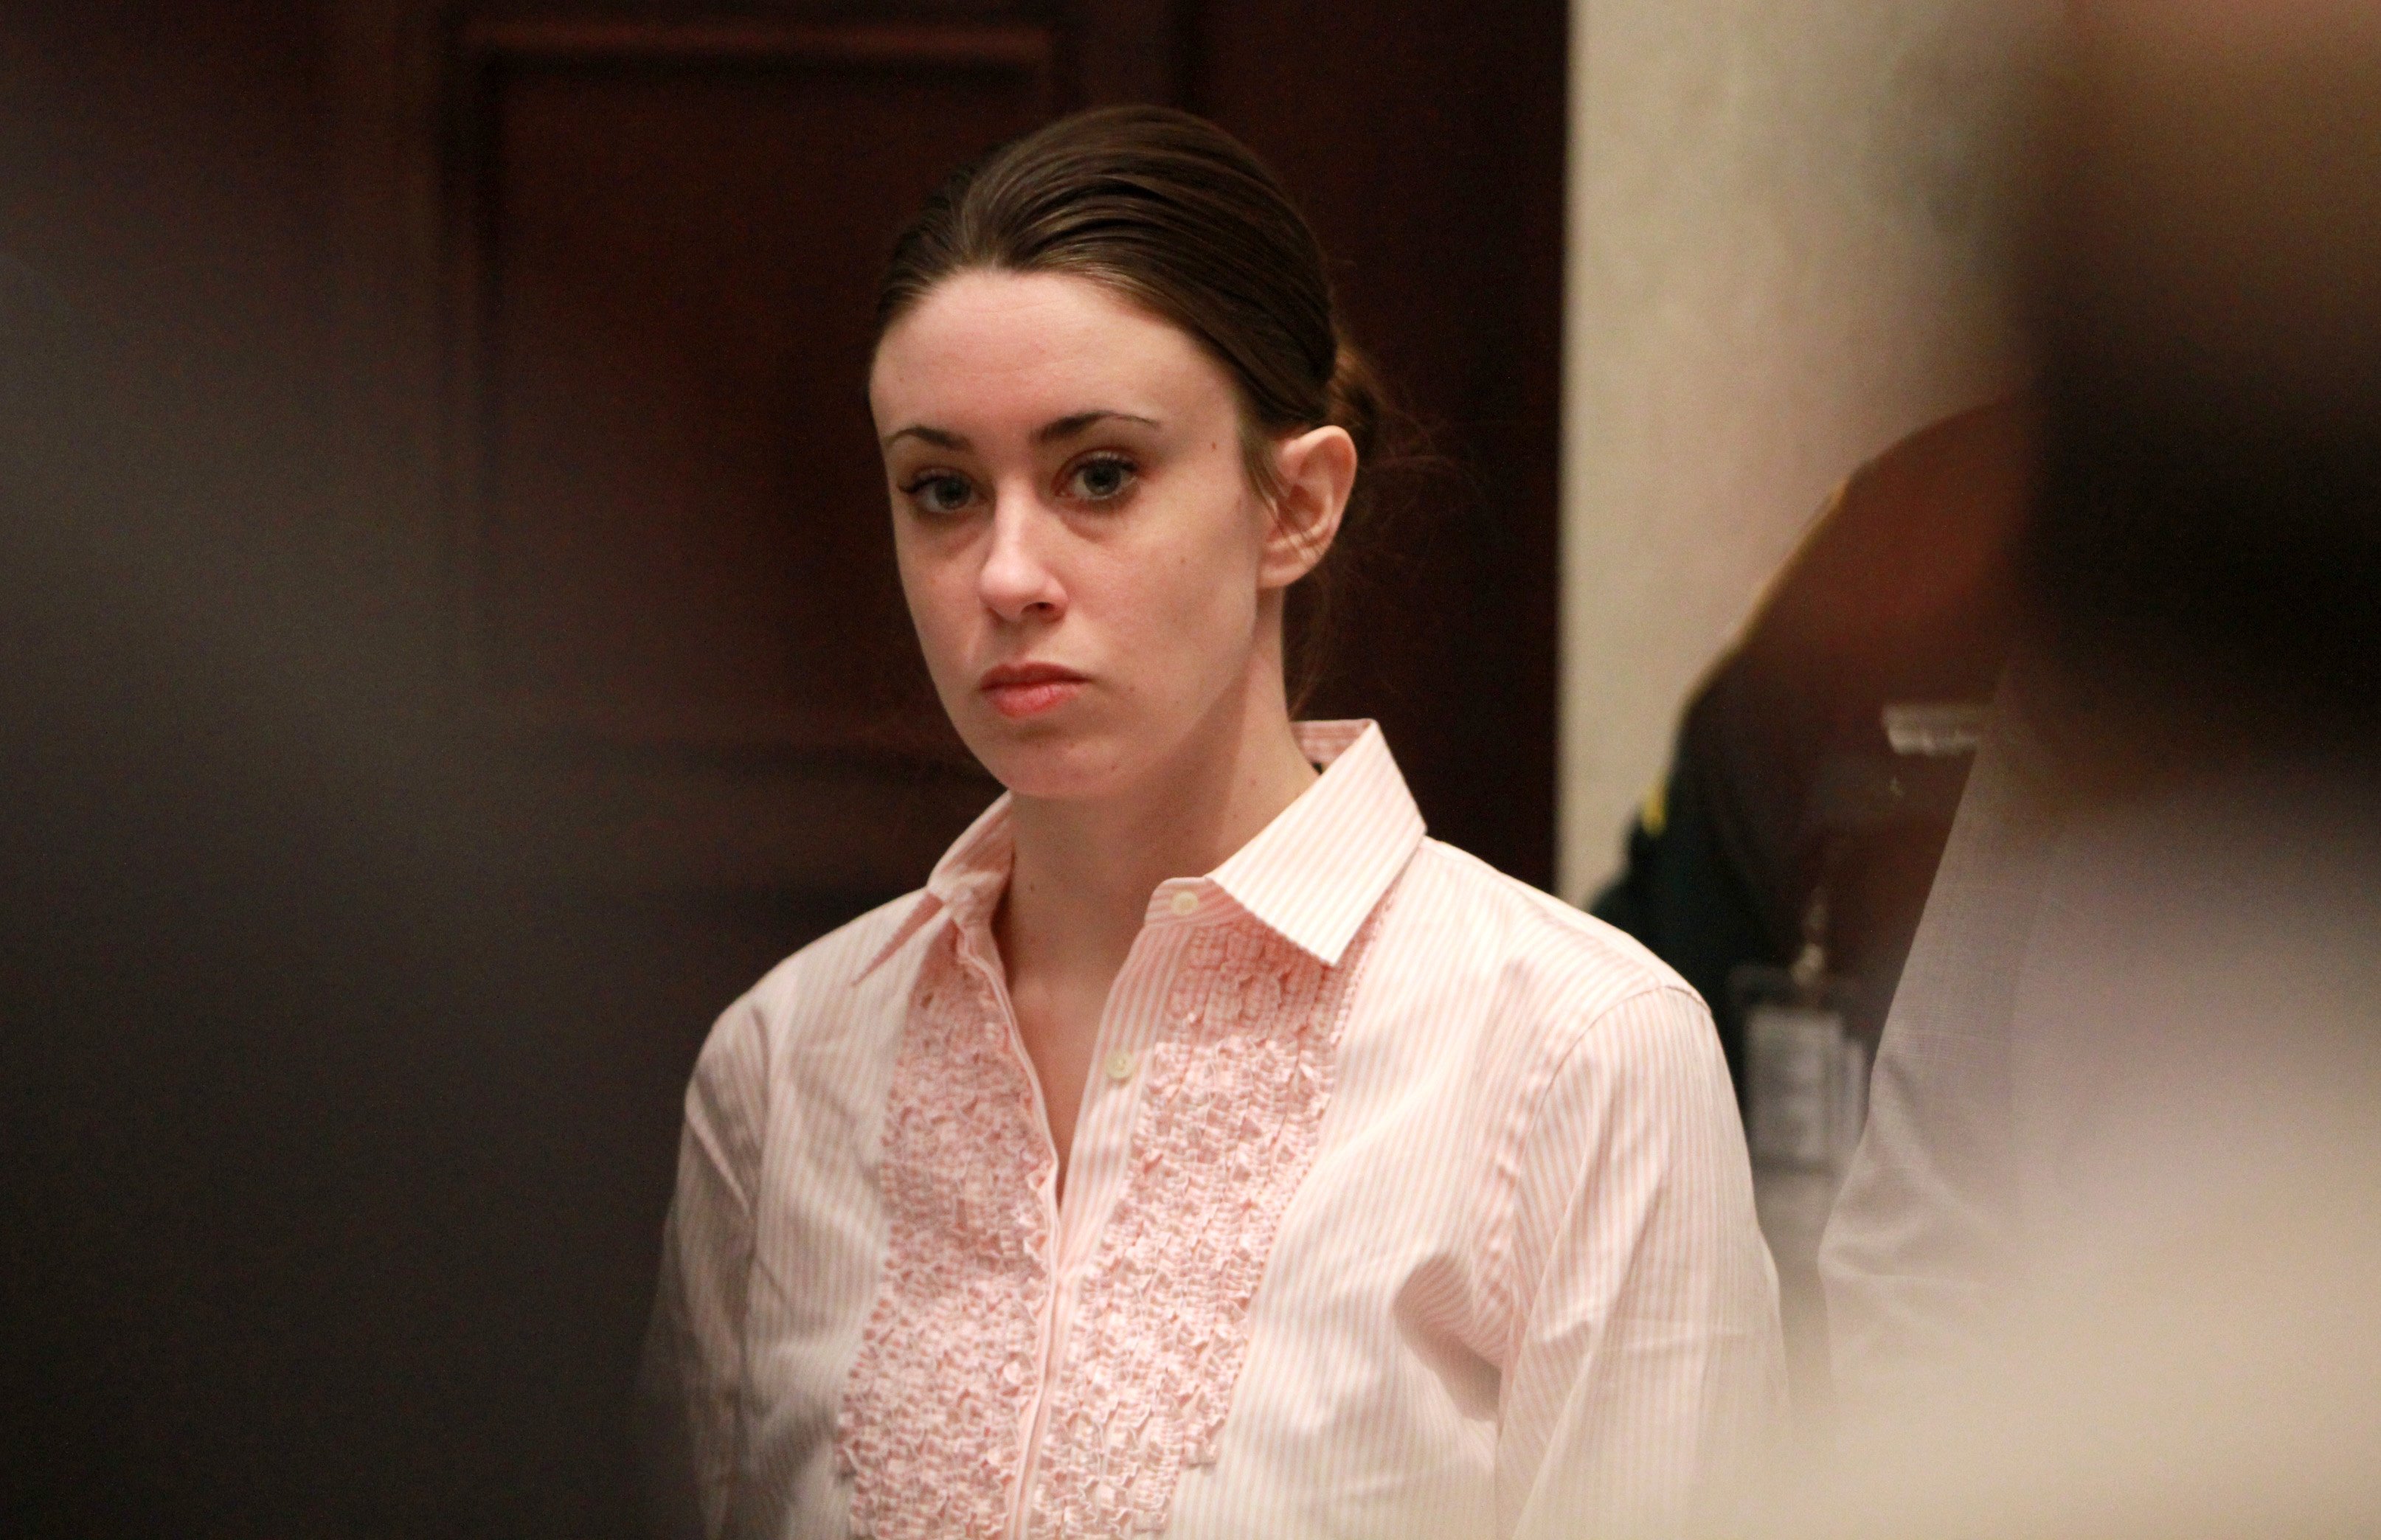 Casey Anthony wearing a pink ruffled blouse during her murder trial